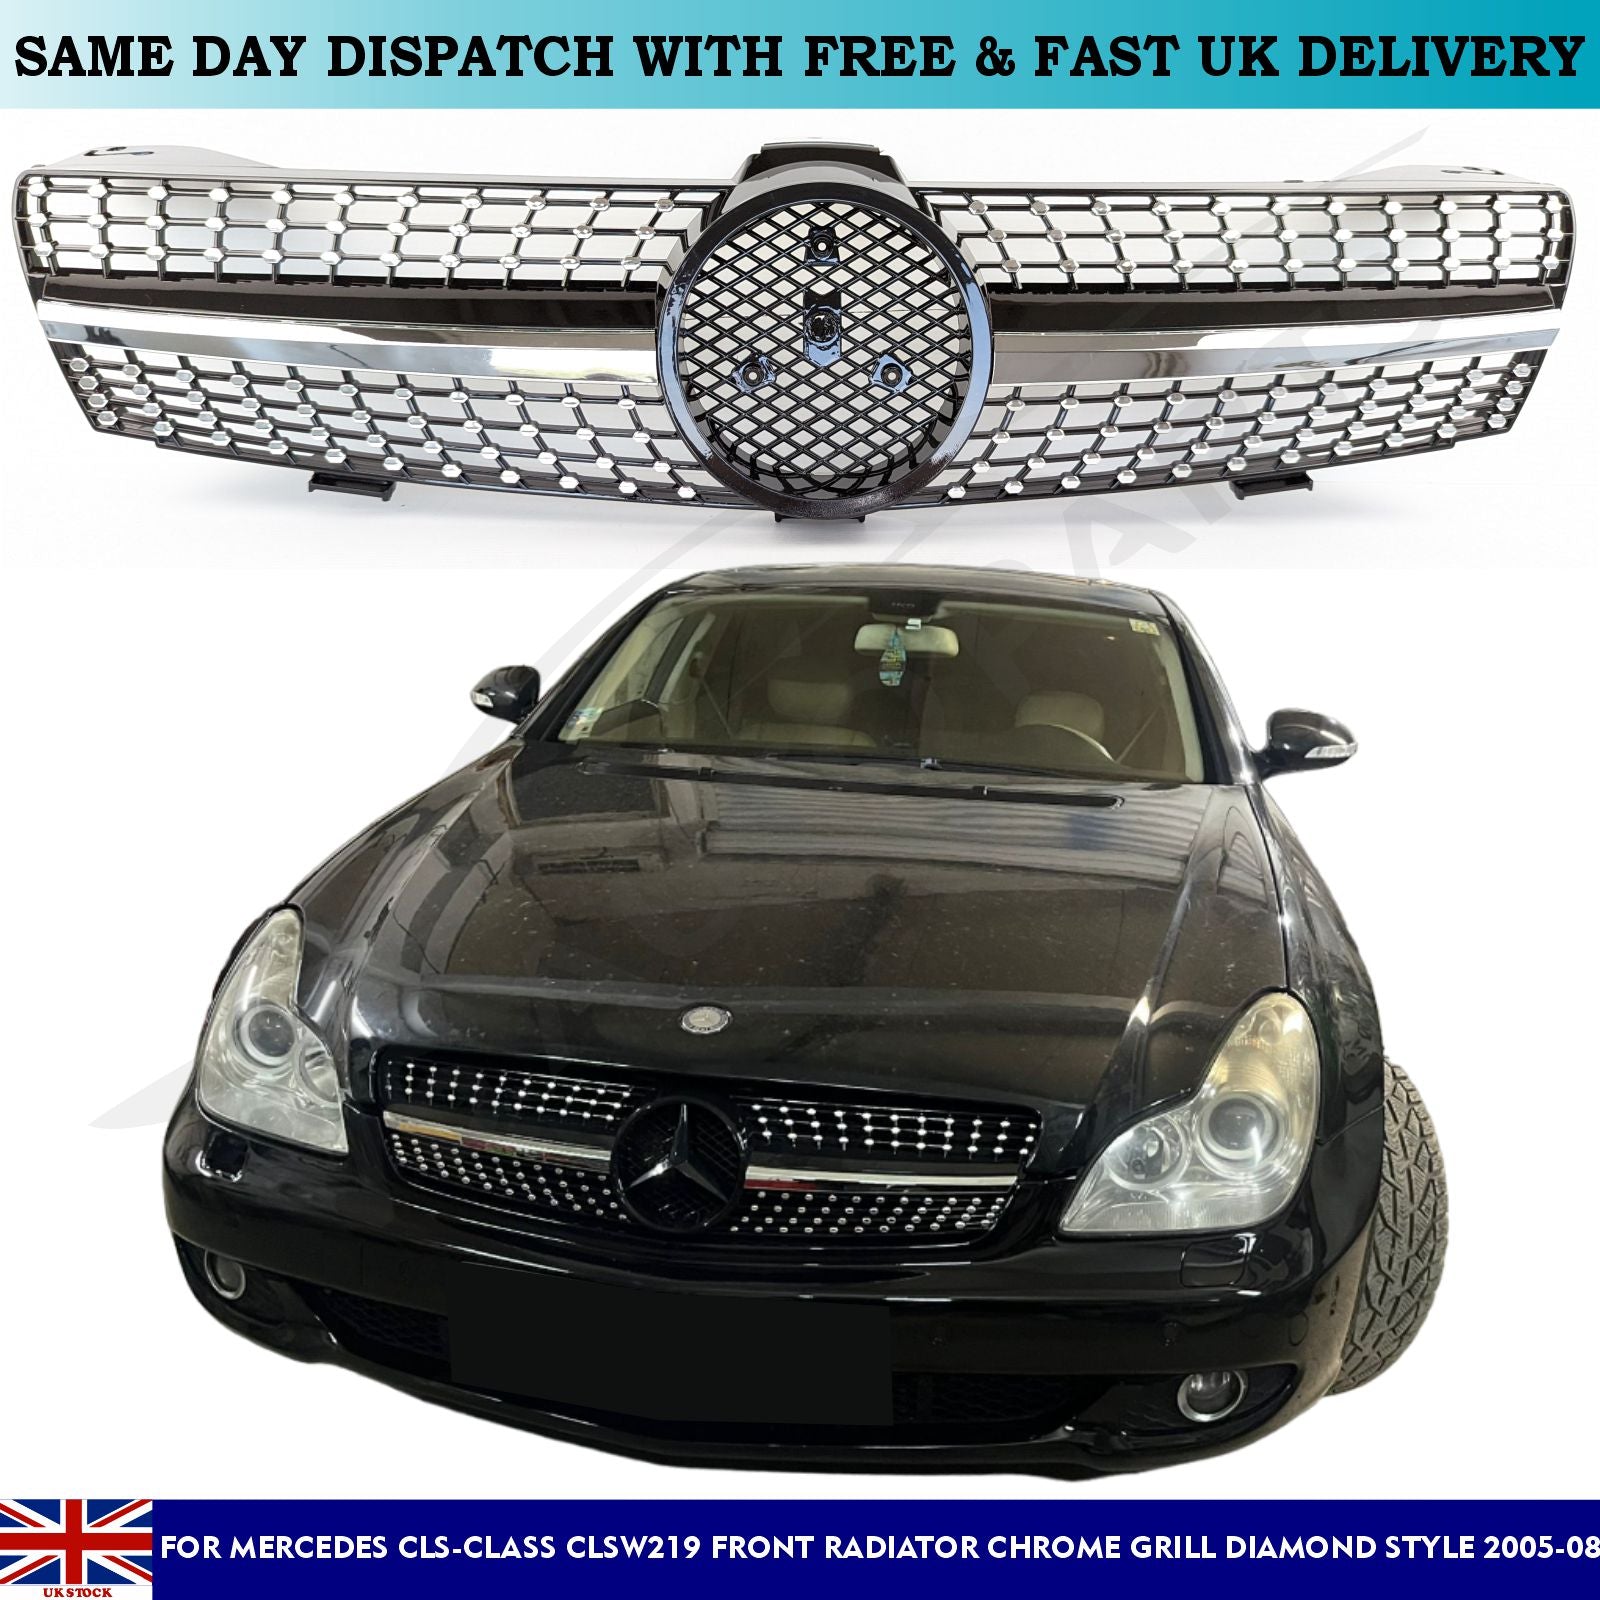 For Mercedes W219 CLS-Class CLS63 AMG Front Radiator Grill Diamond Style 2005-08